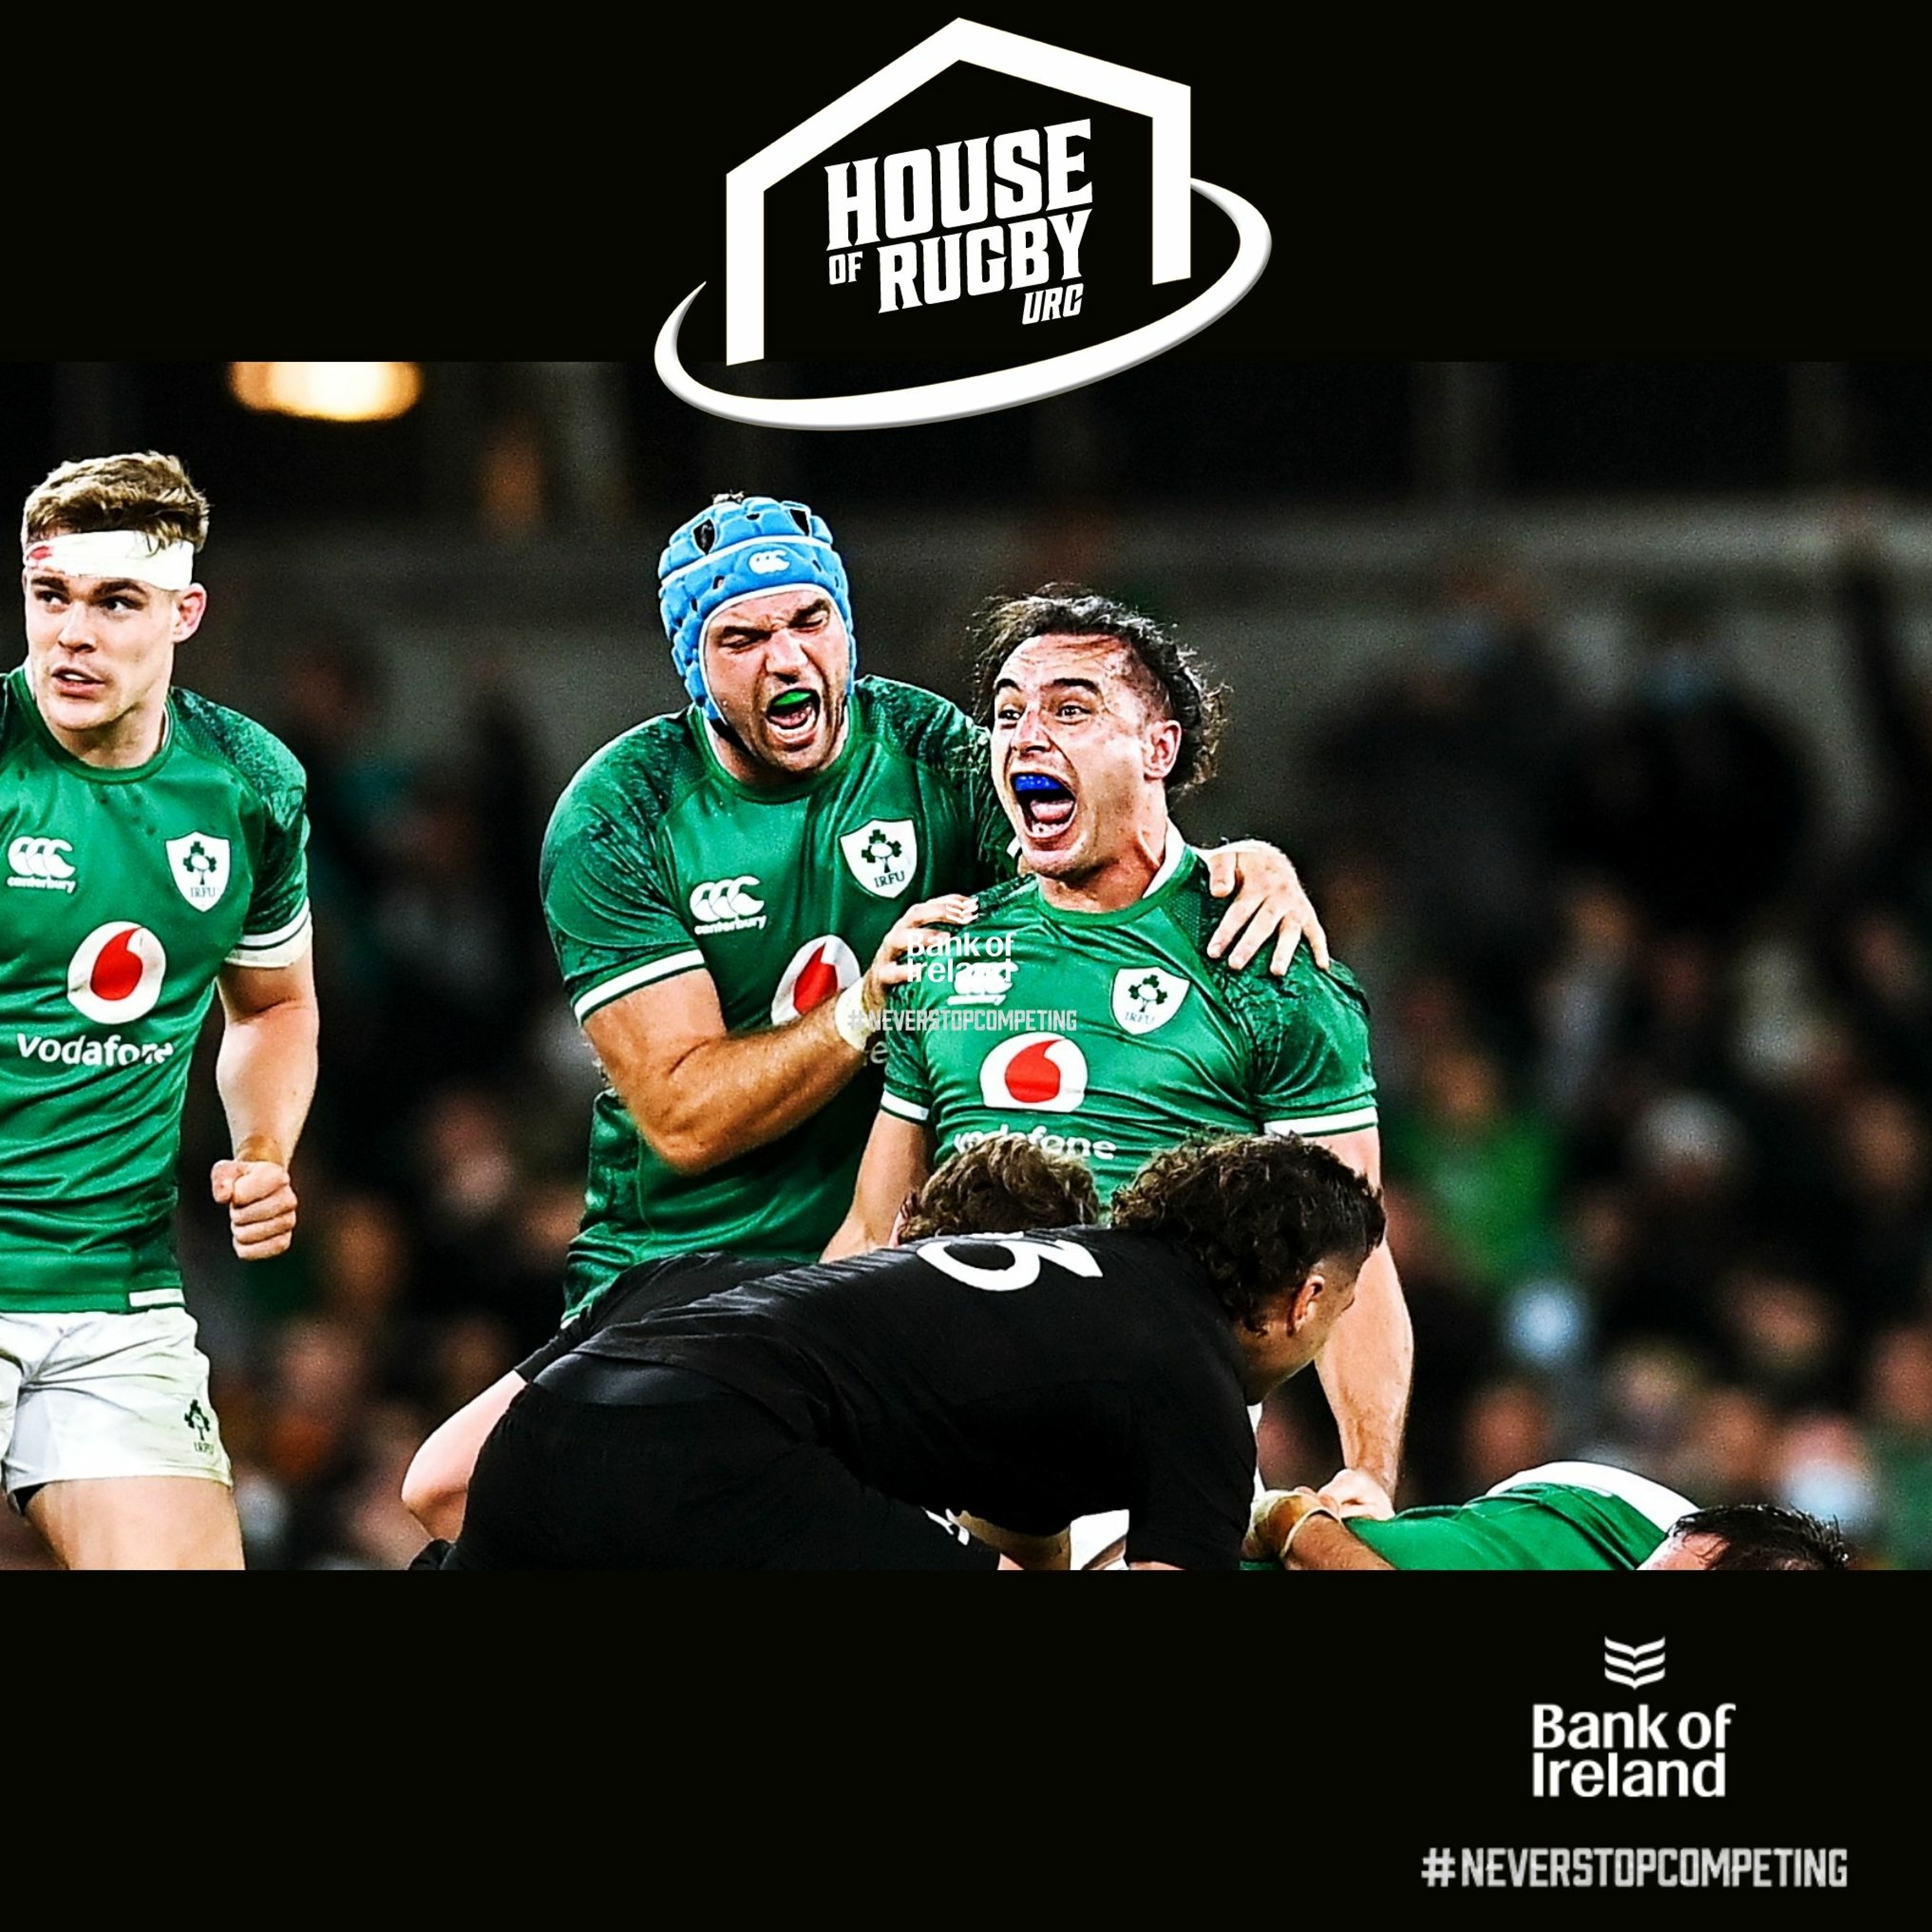 All Blacks conquered, James Lowe’s tackle, Jack Conan’s smile AND Felipe Contepomi chat